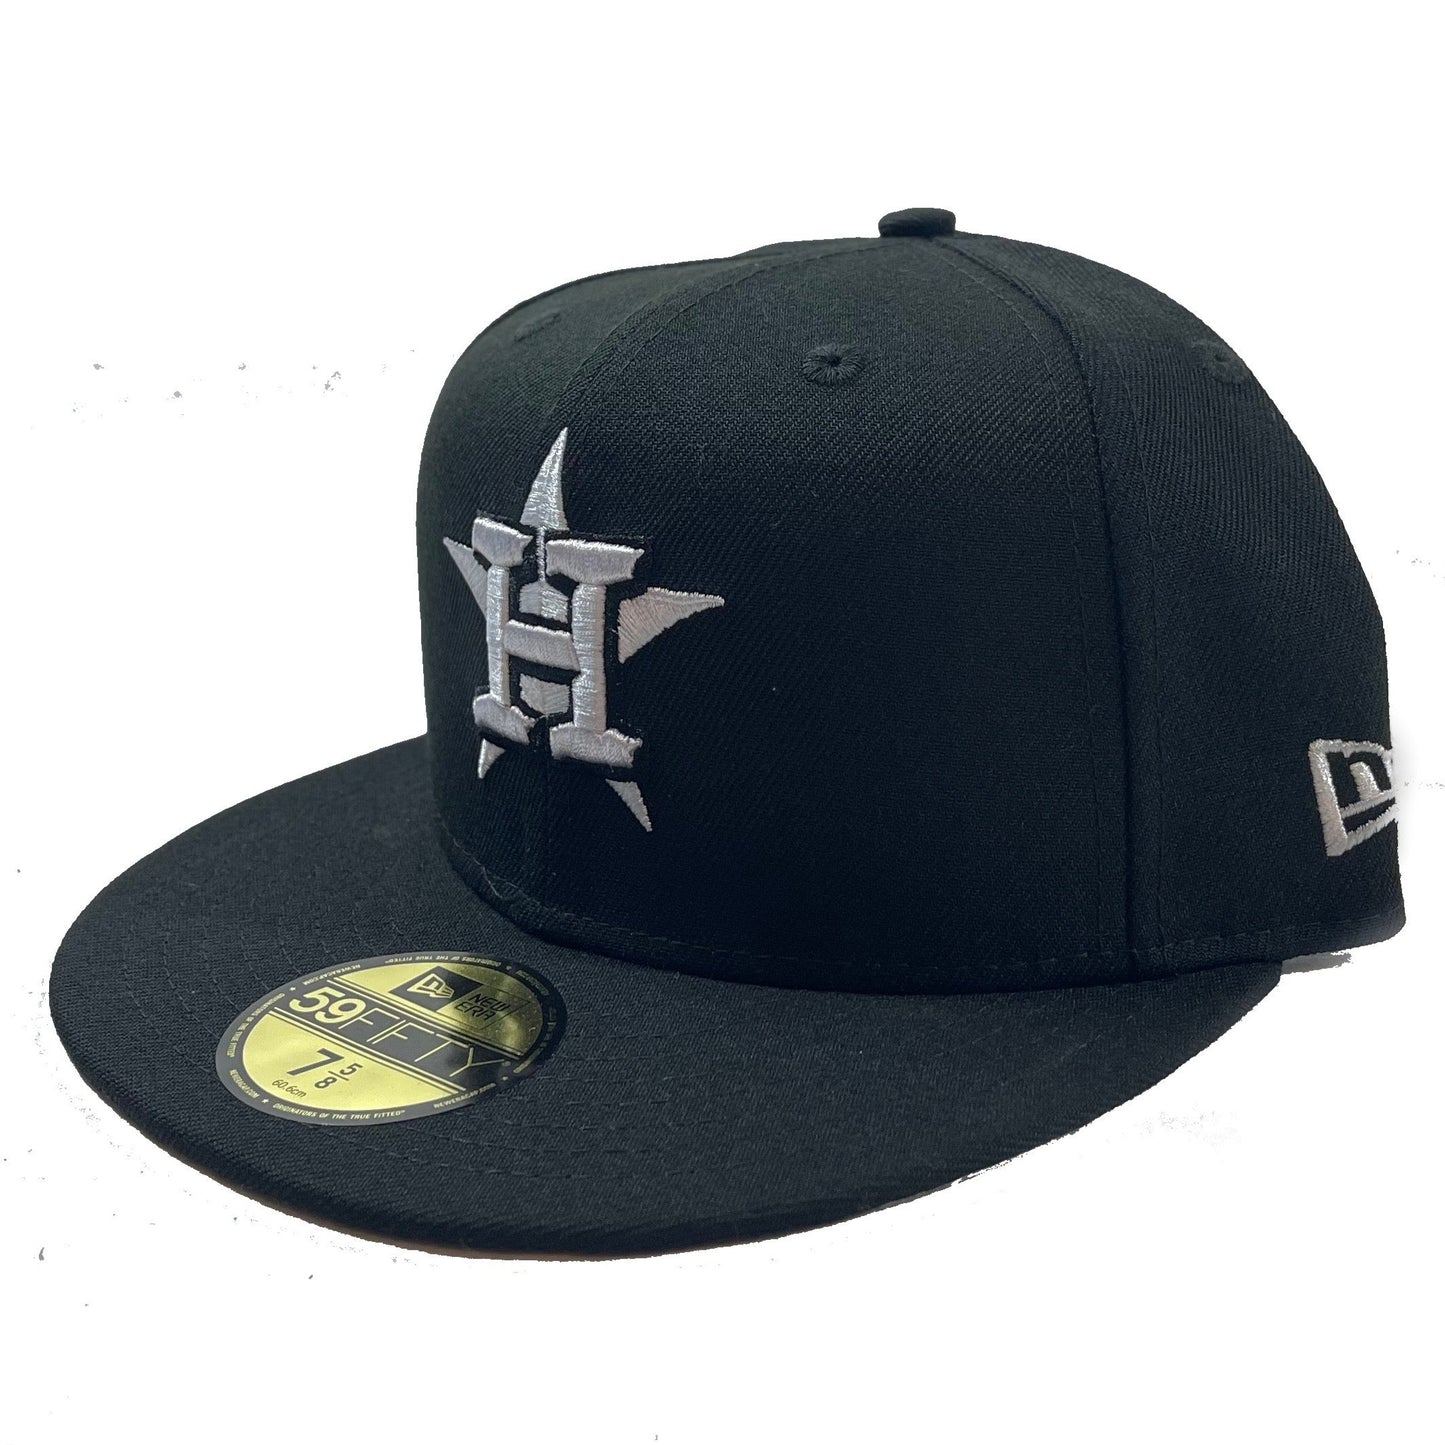 Houston Astros (Black) Fitted